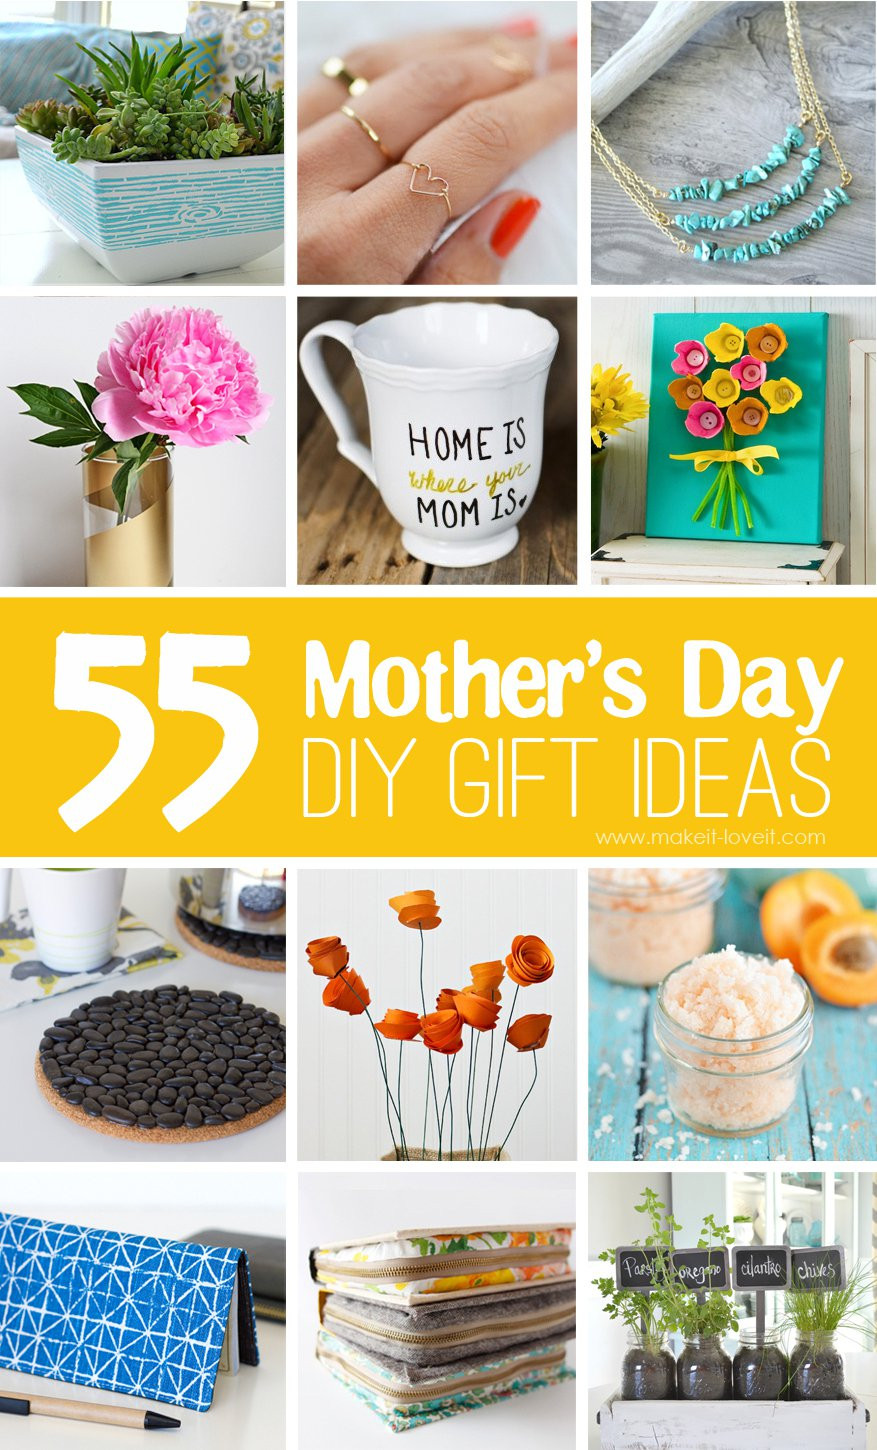 Valentine'S Day Gift Ideas For Mom
 40 Homemade Mother s Day Gift Ideas